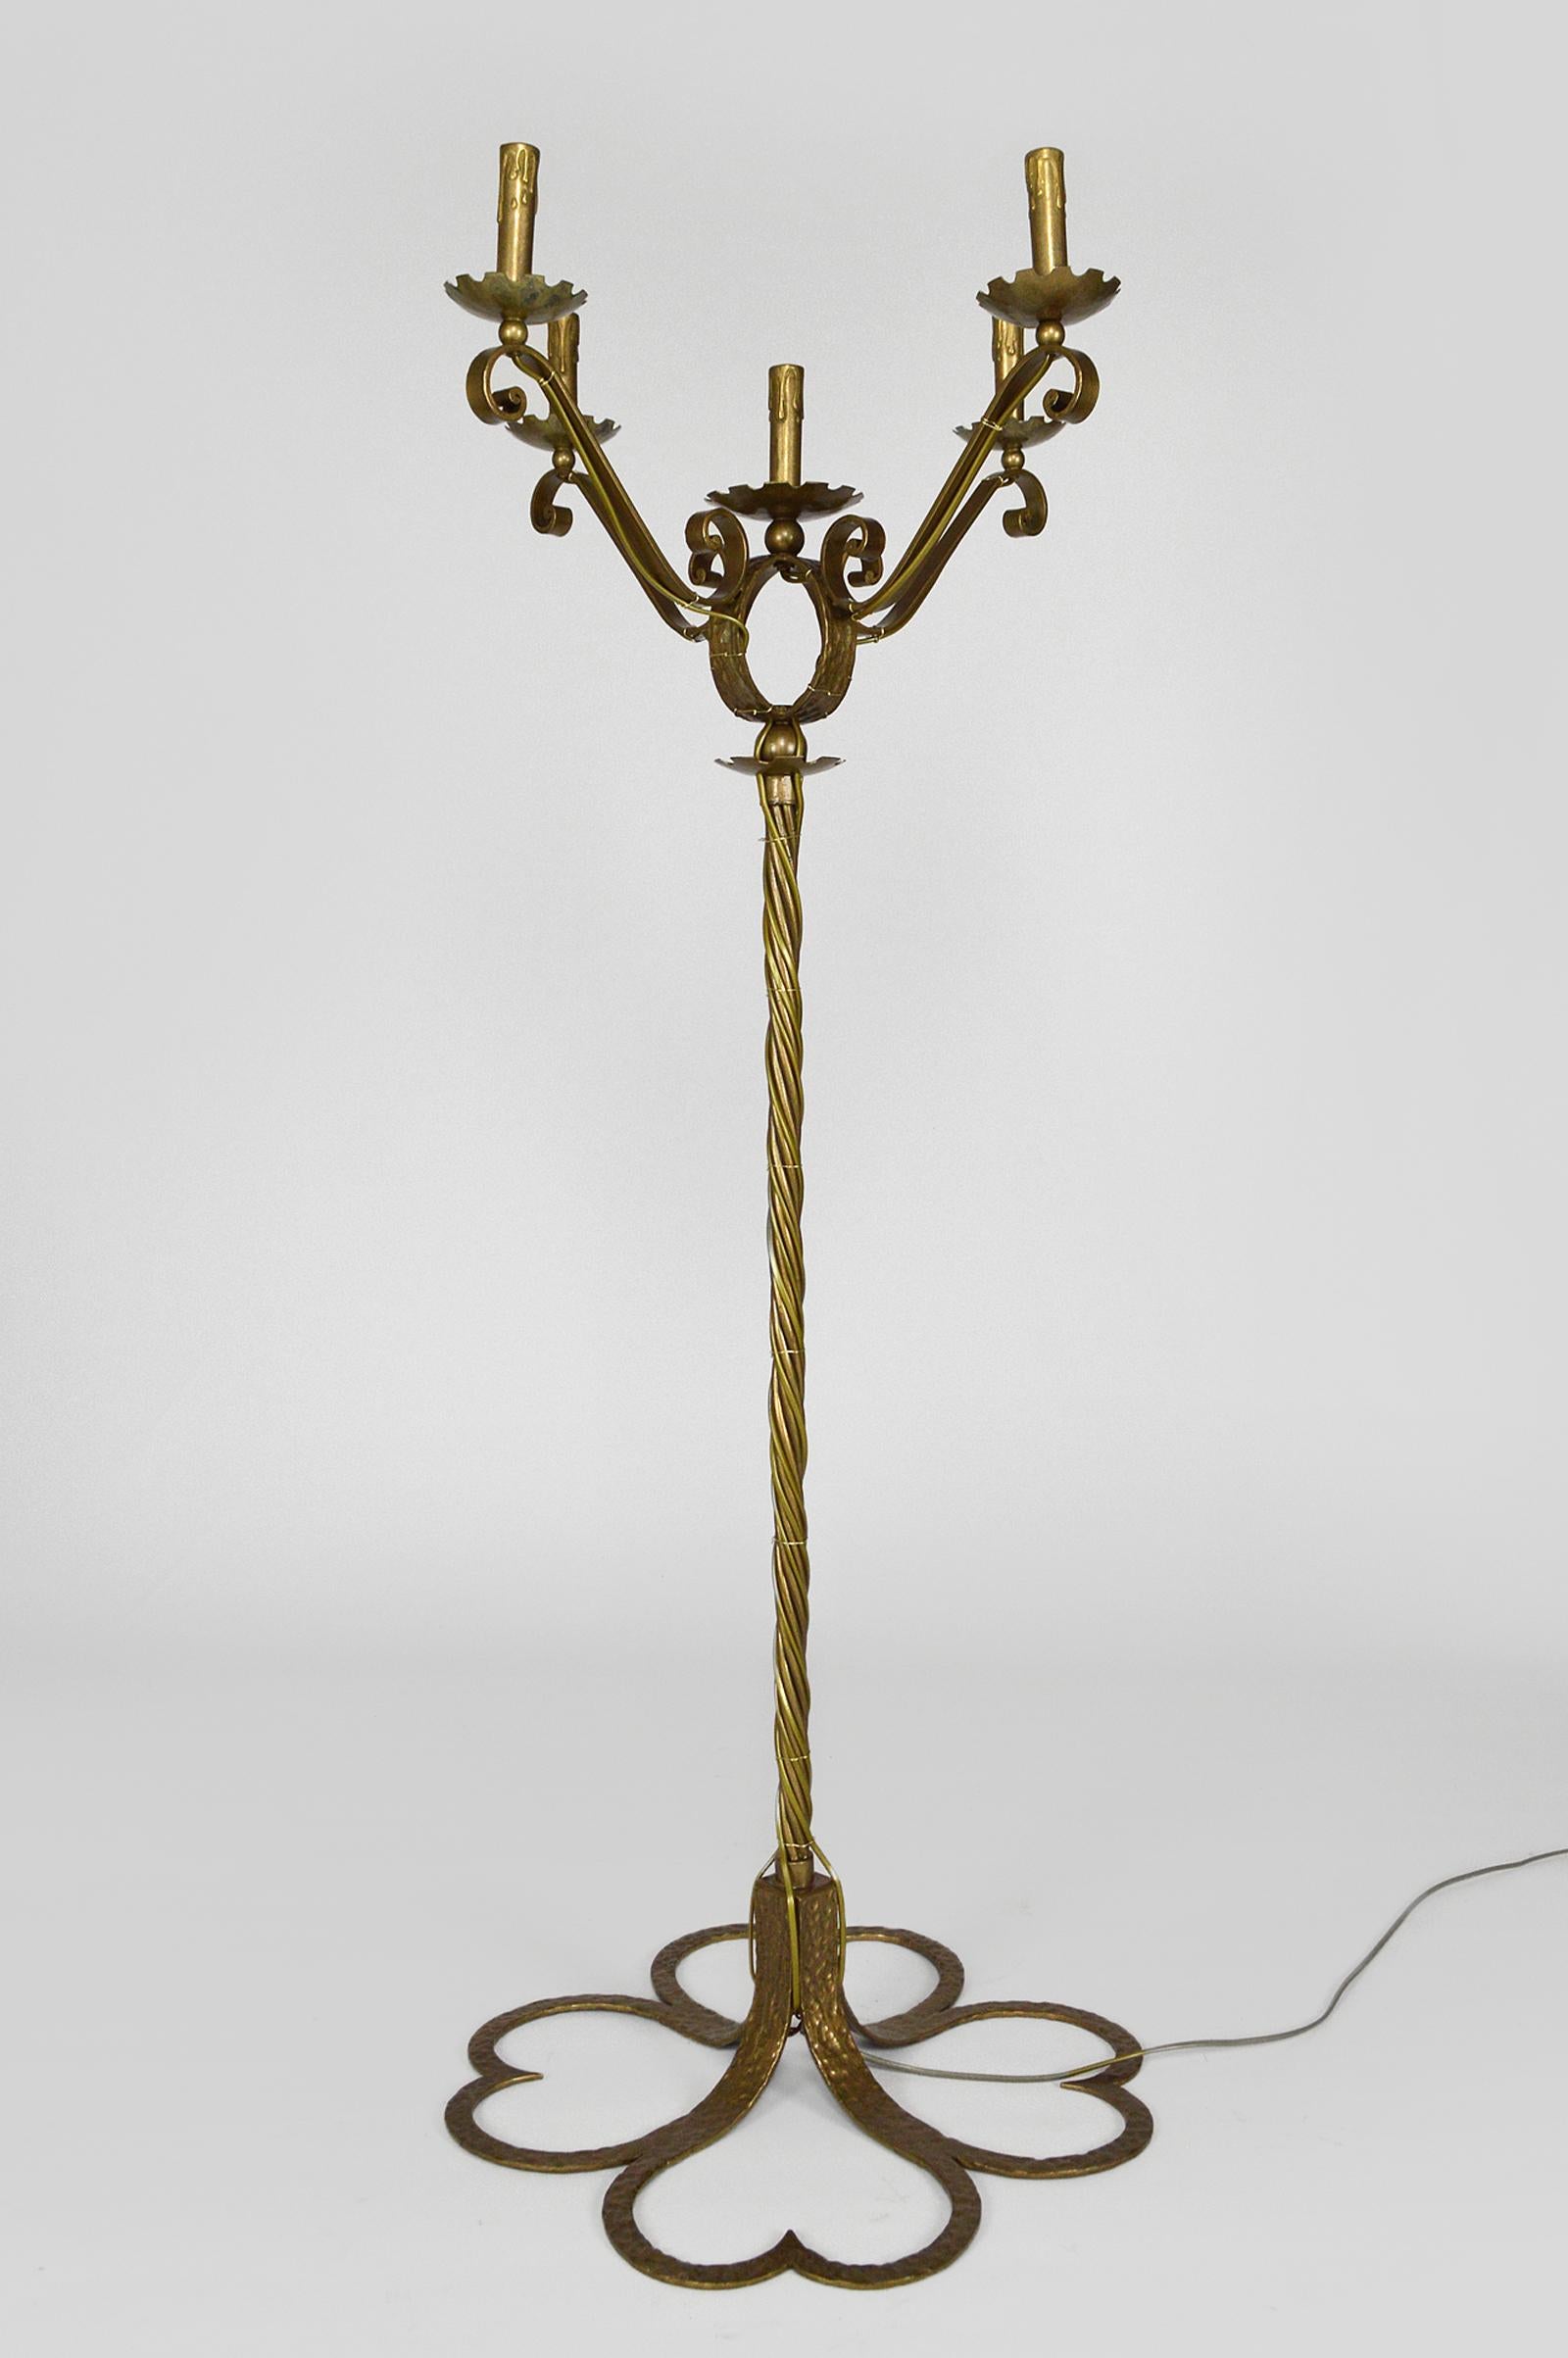 Floor lamp / torchiere / candlestick in gilded wrought iron.
5 lights. Clover / heart shaped base.

Mid century, France.

In excellent condition, electricity redone.

Dimensions :
Height 141cm
Diameter 60cm.

    